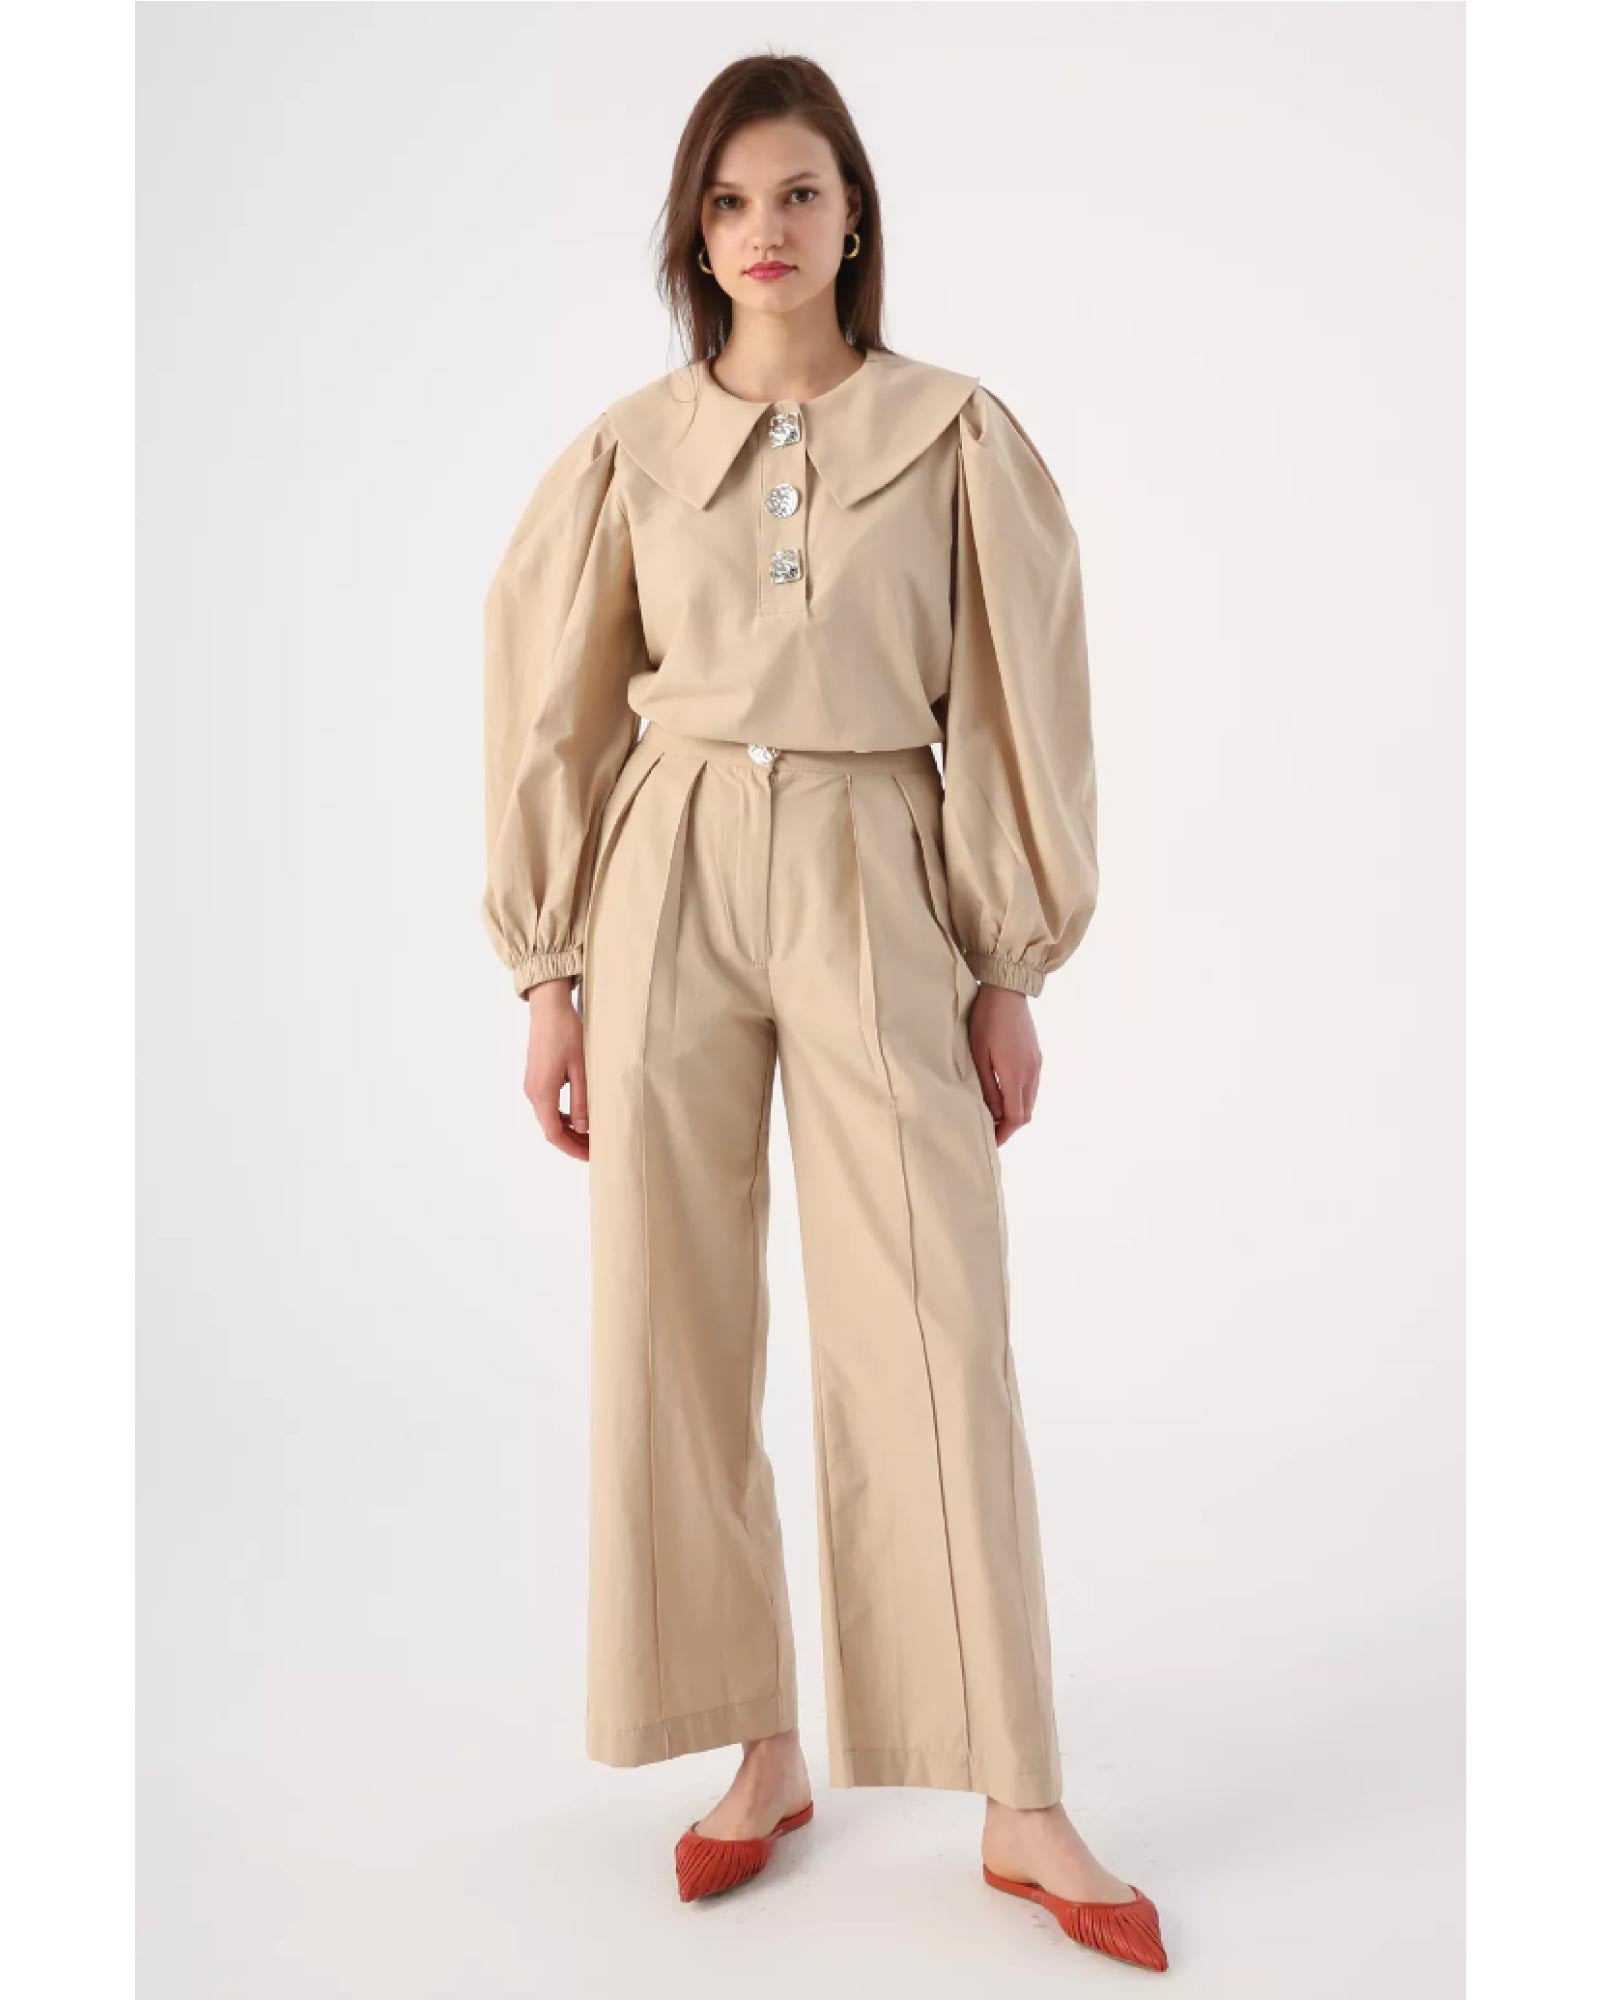 Hijab two-piece set consisting of a blouse with a large collar and gold-colored buttons and trousers